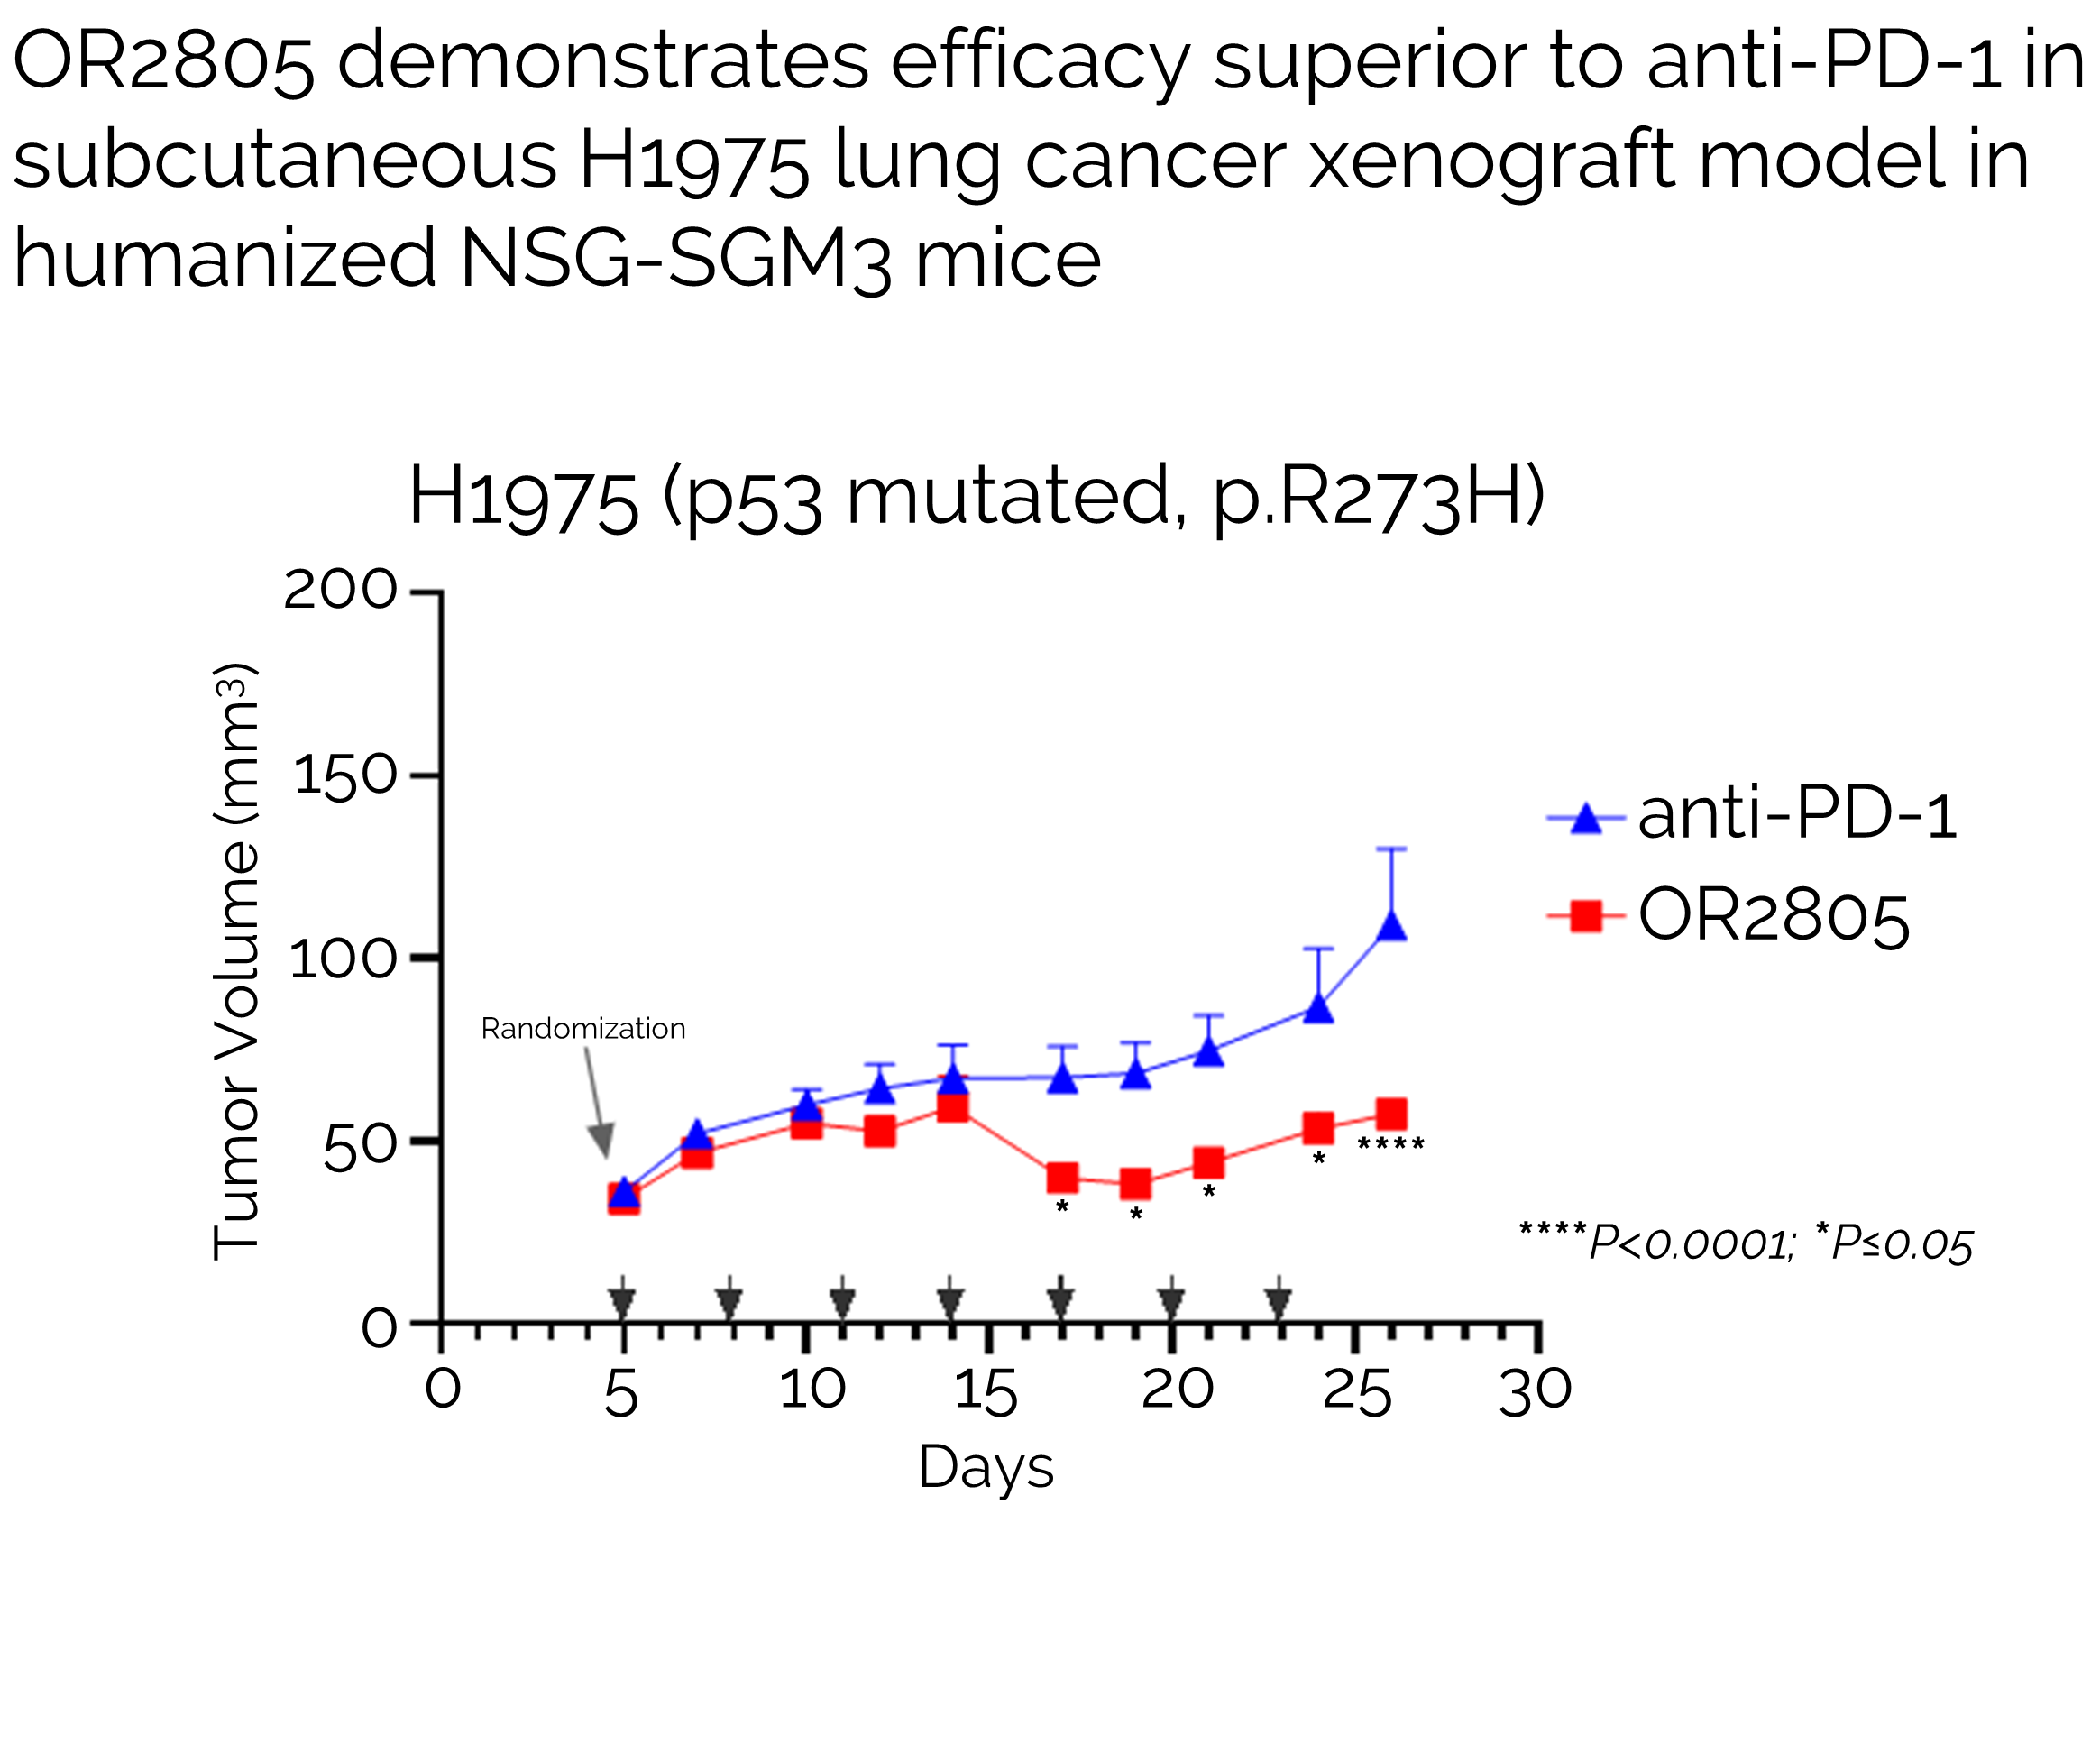 graph indicating OR2805 superior anti-PD-1